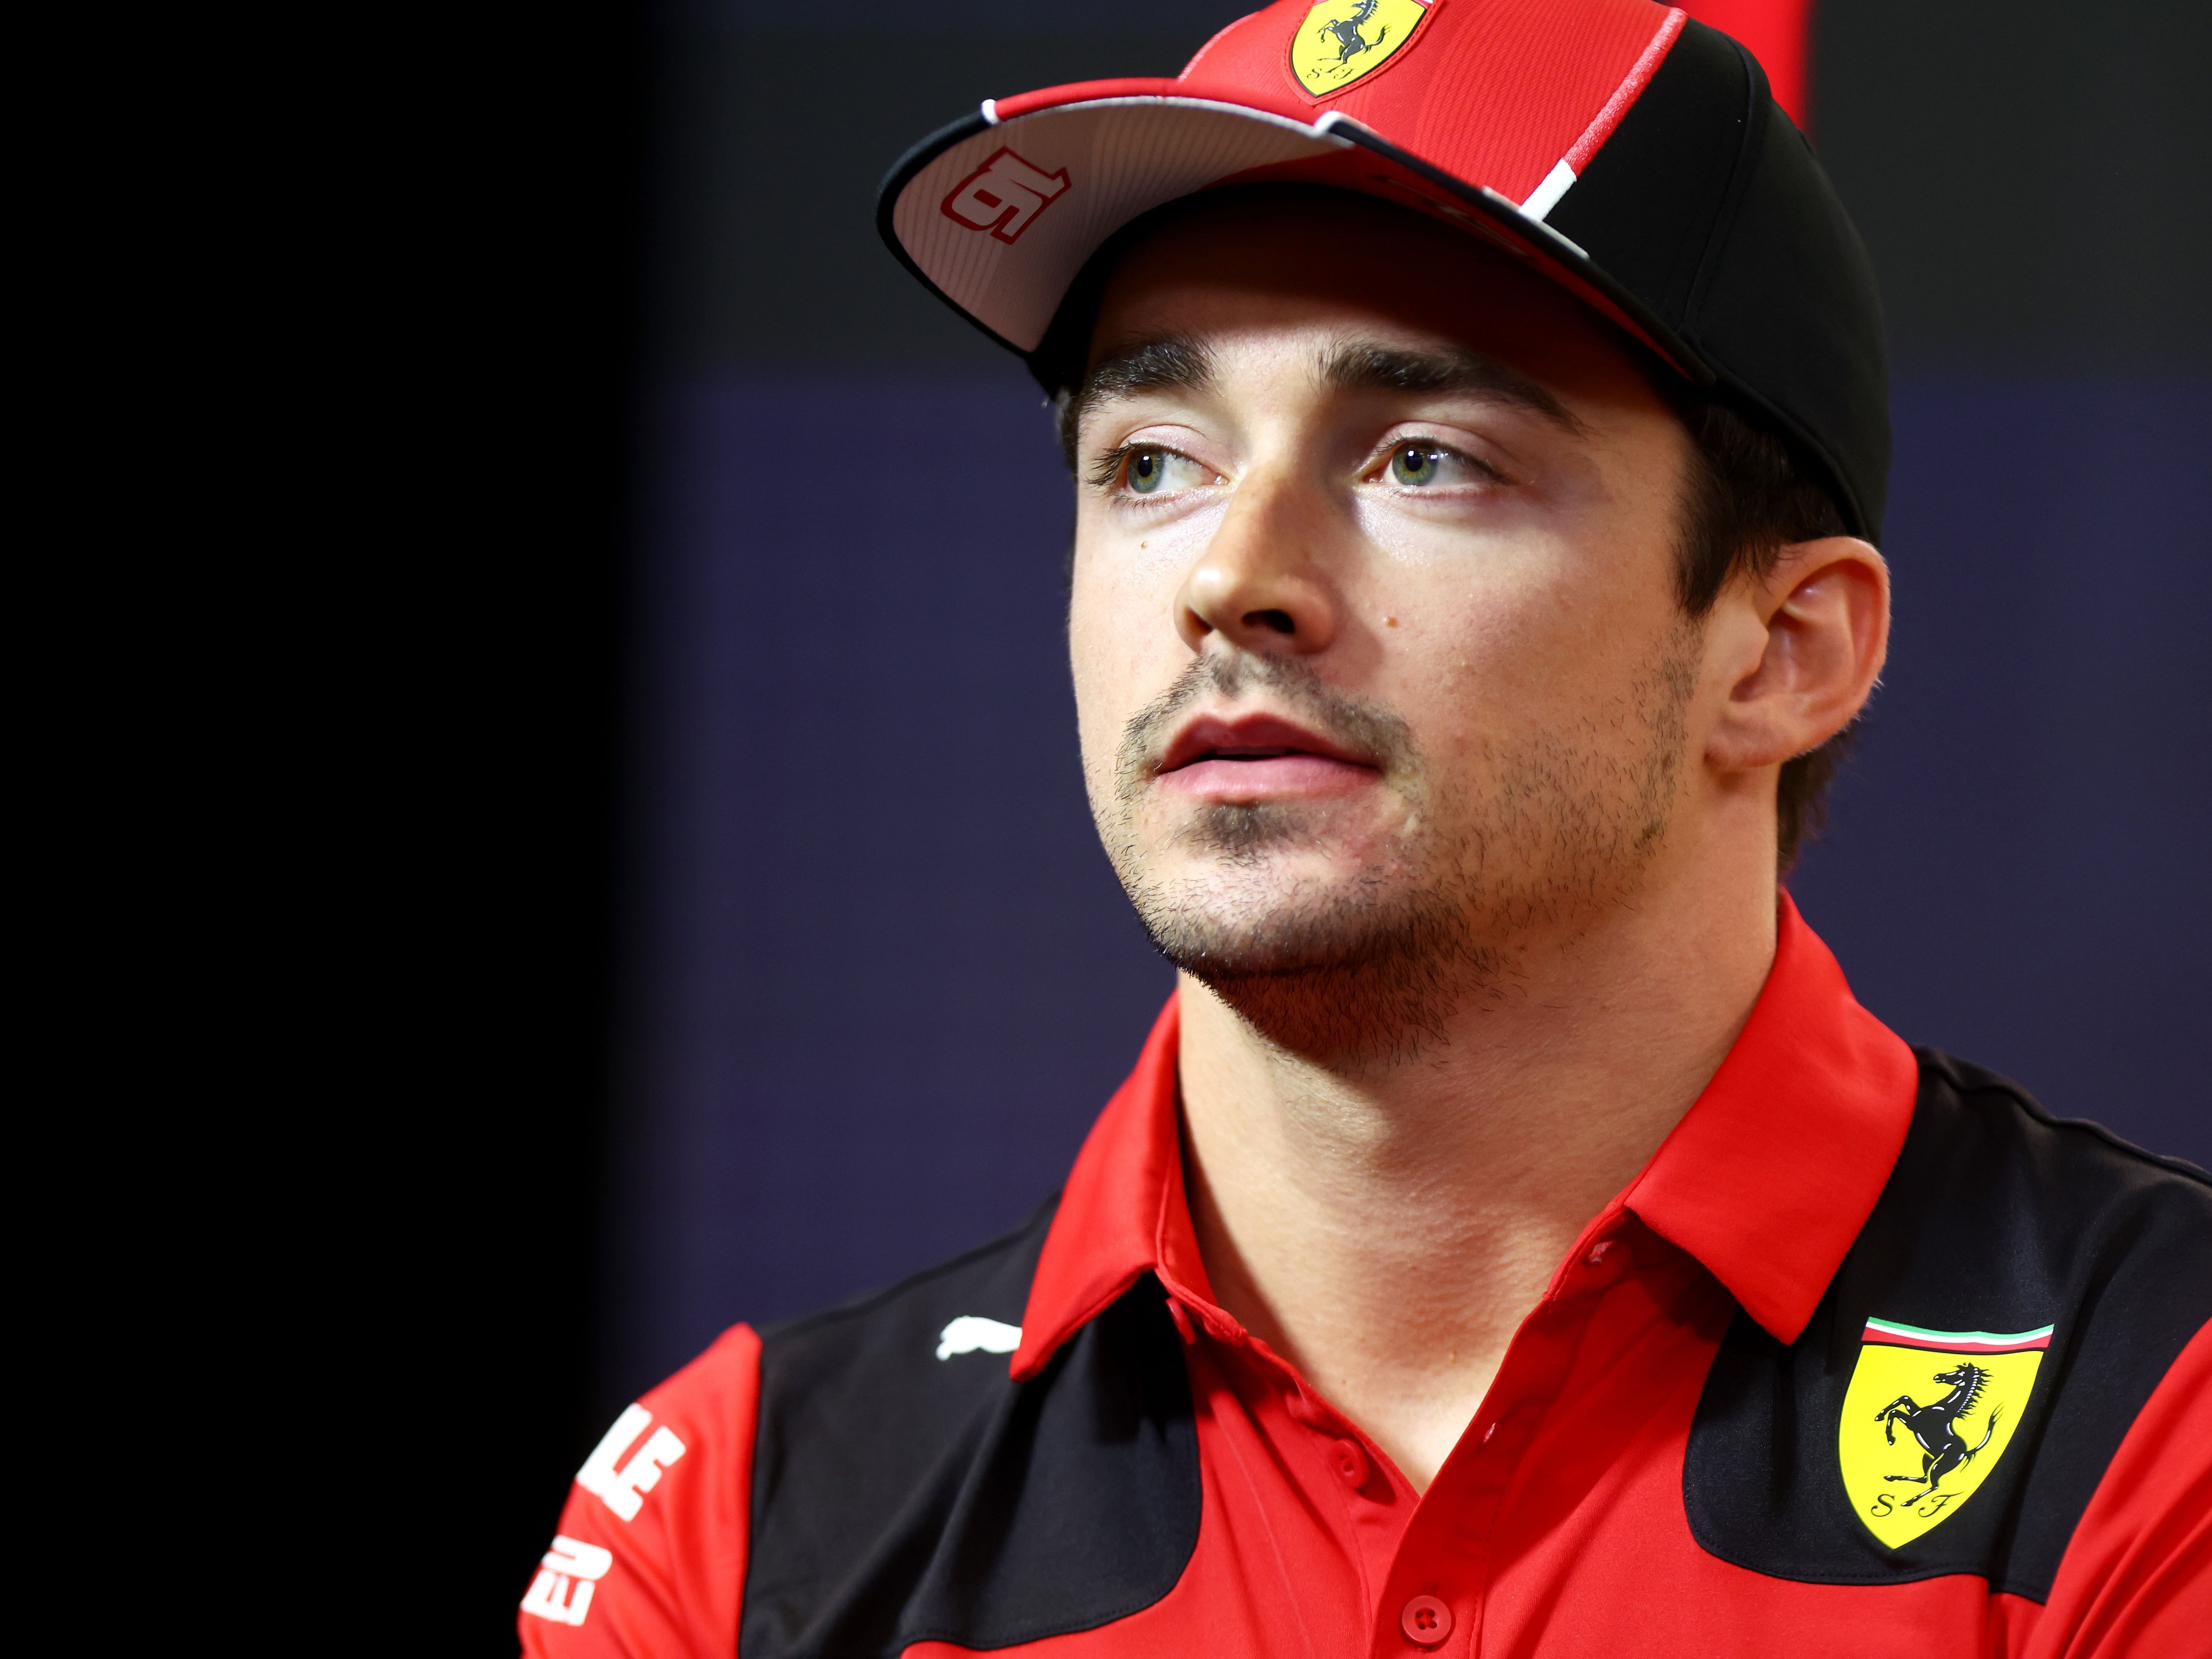 Charles Leclerc attends the Drivers Press Conference during previews ahead of the 2023 F1 Australian Grand Prix (Photo by Dan Istitene/Getty Images)